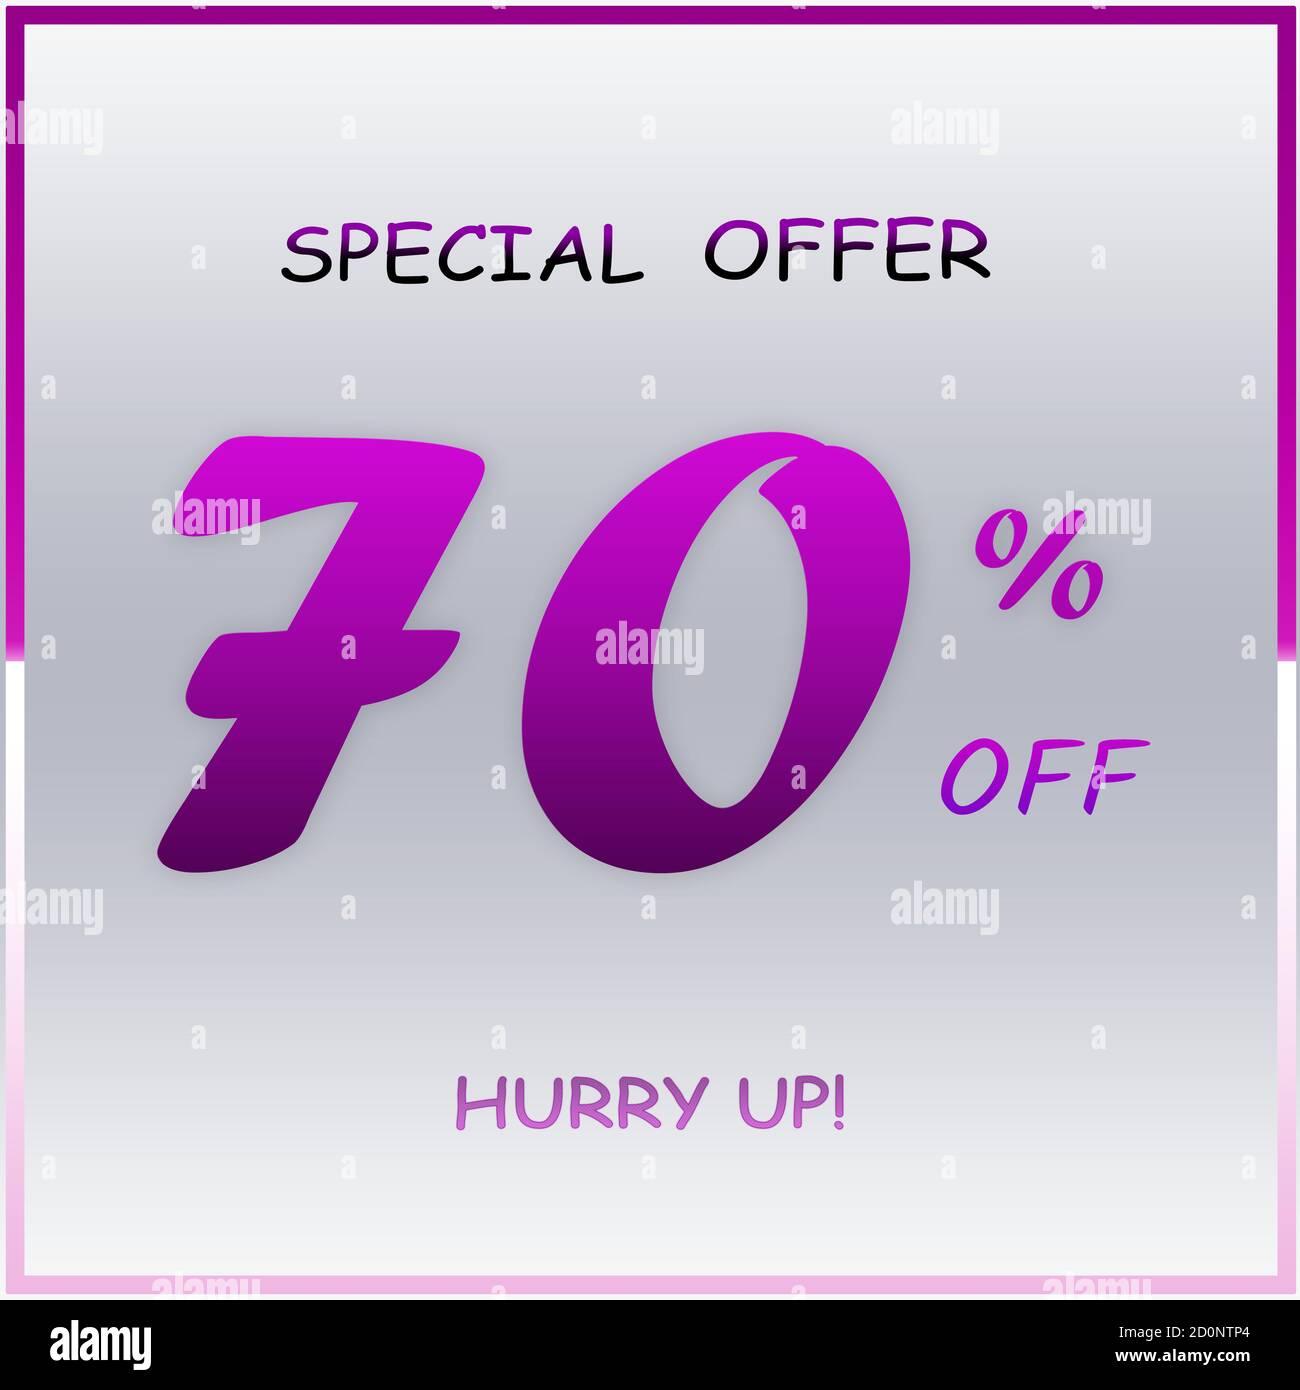 Elegant Purple Special Offer Discount Banner With 70% Off Hurry Up Text Design On White Gradient Background. Stock Photo